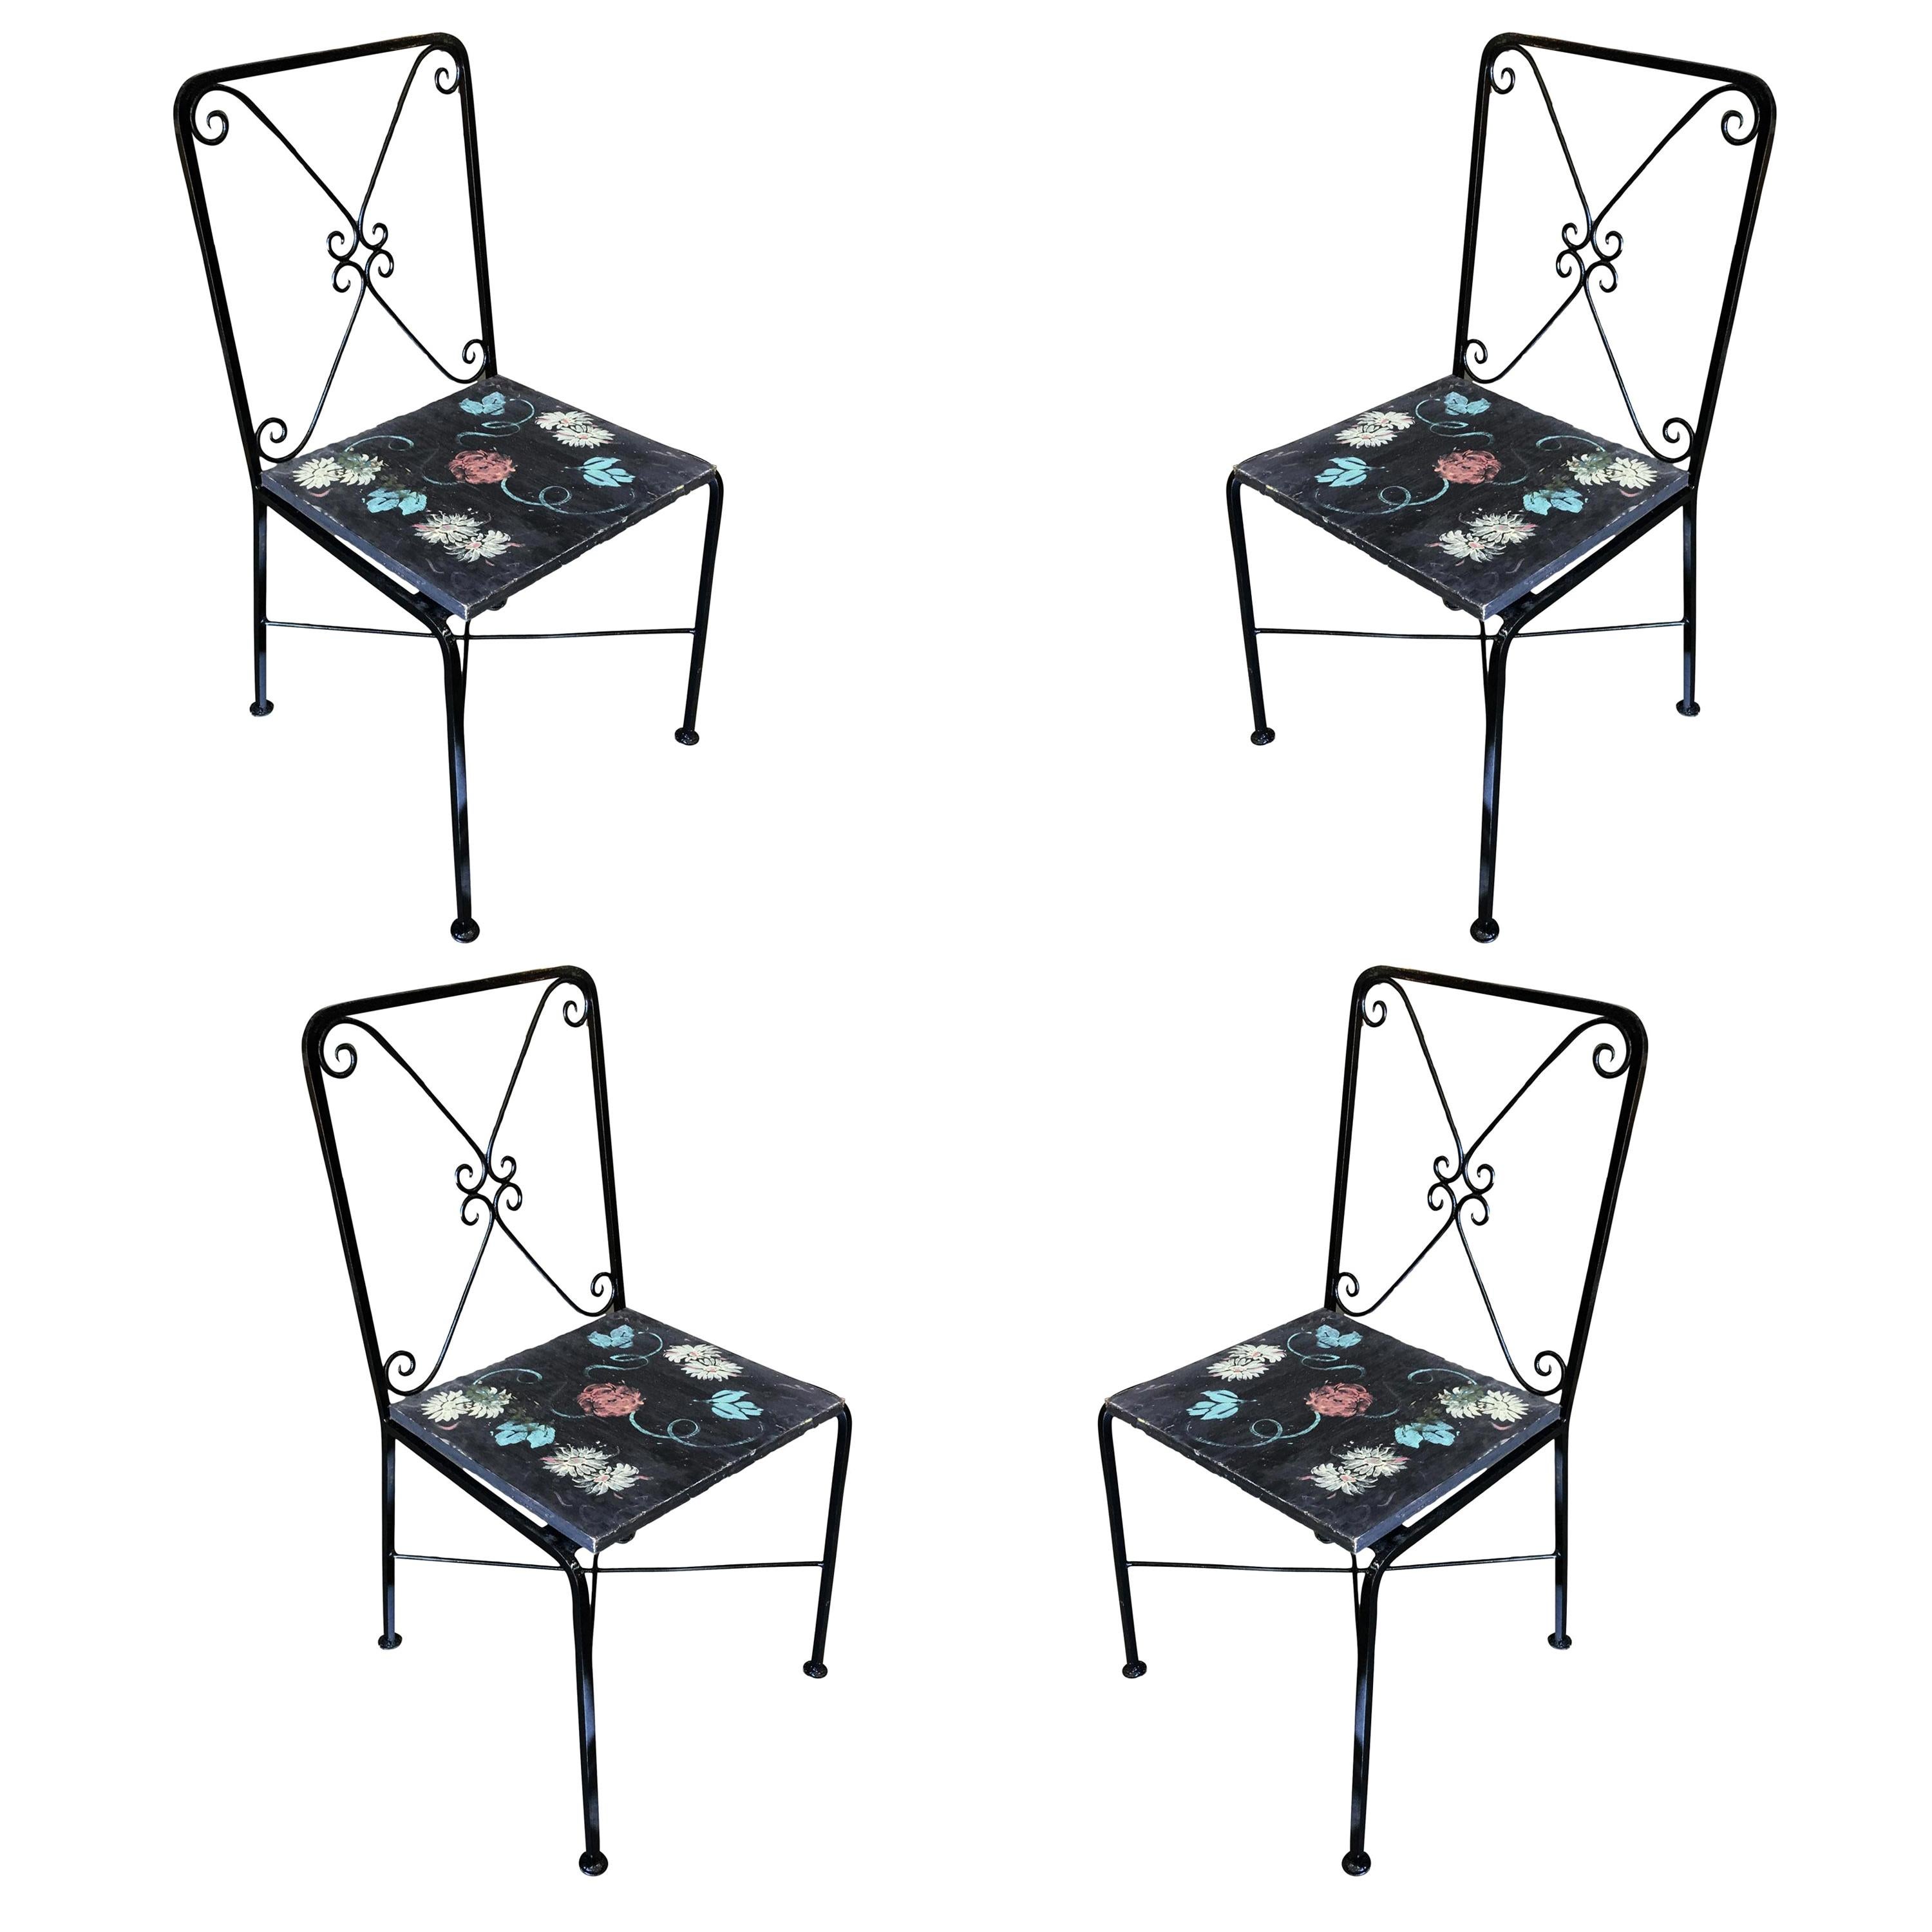 Scrolling Iron Patio/Outdoor Lounge Chair with Pad Seat, Set of Four